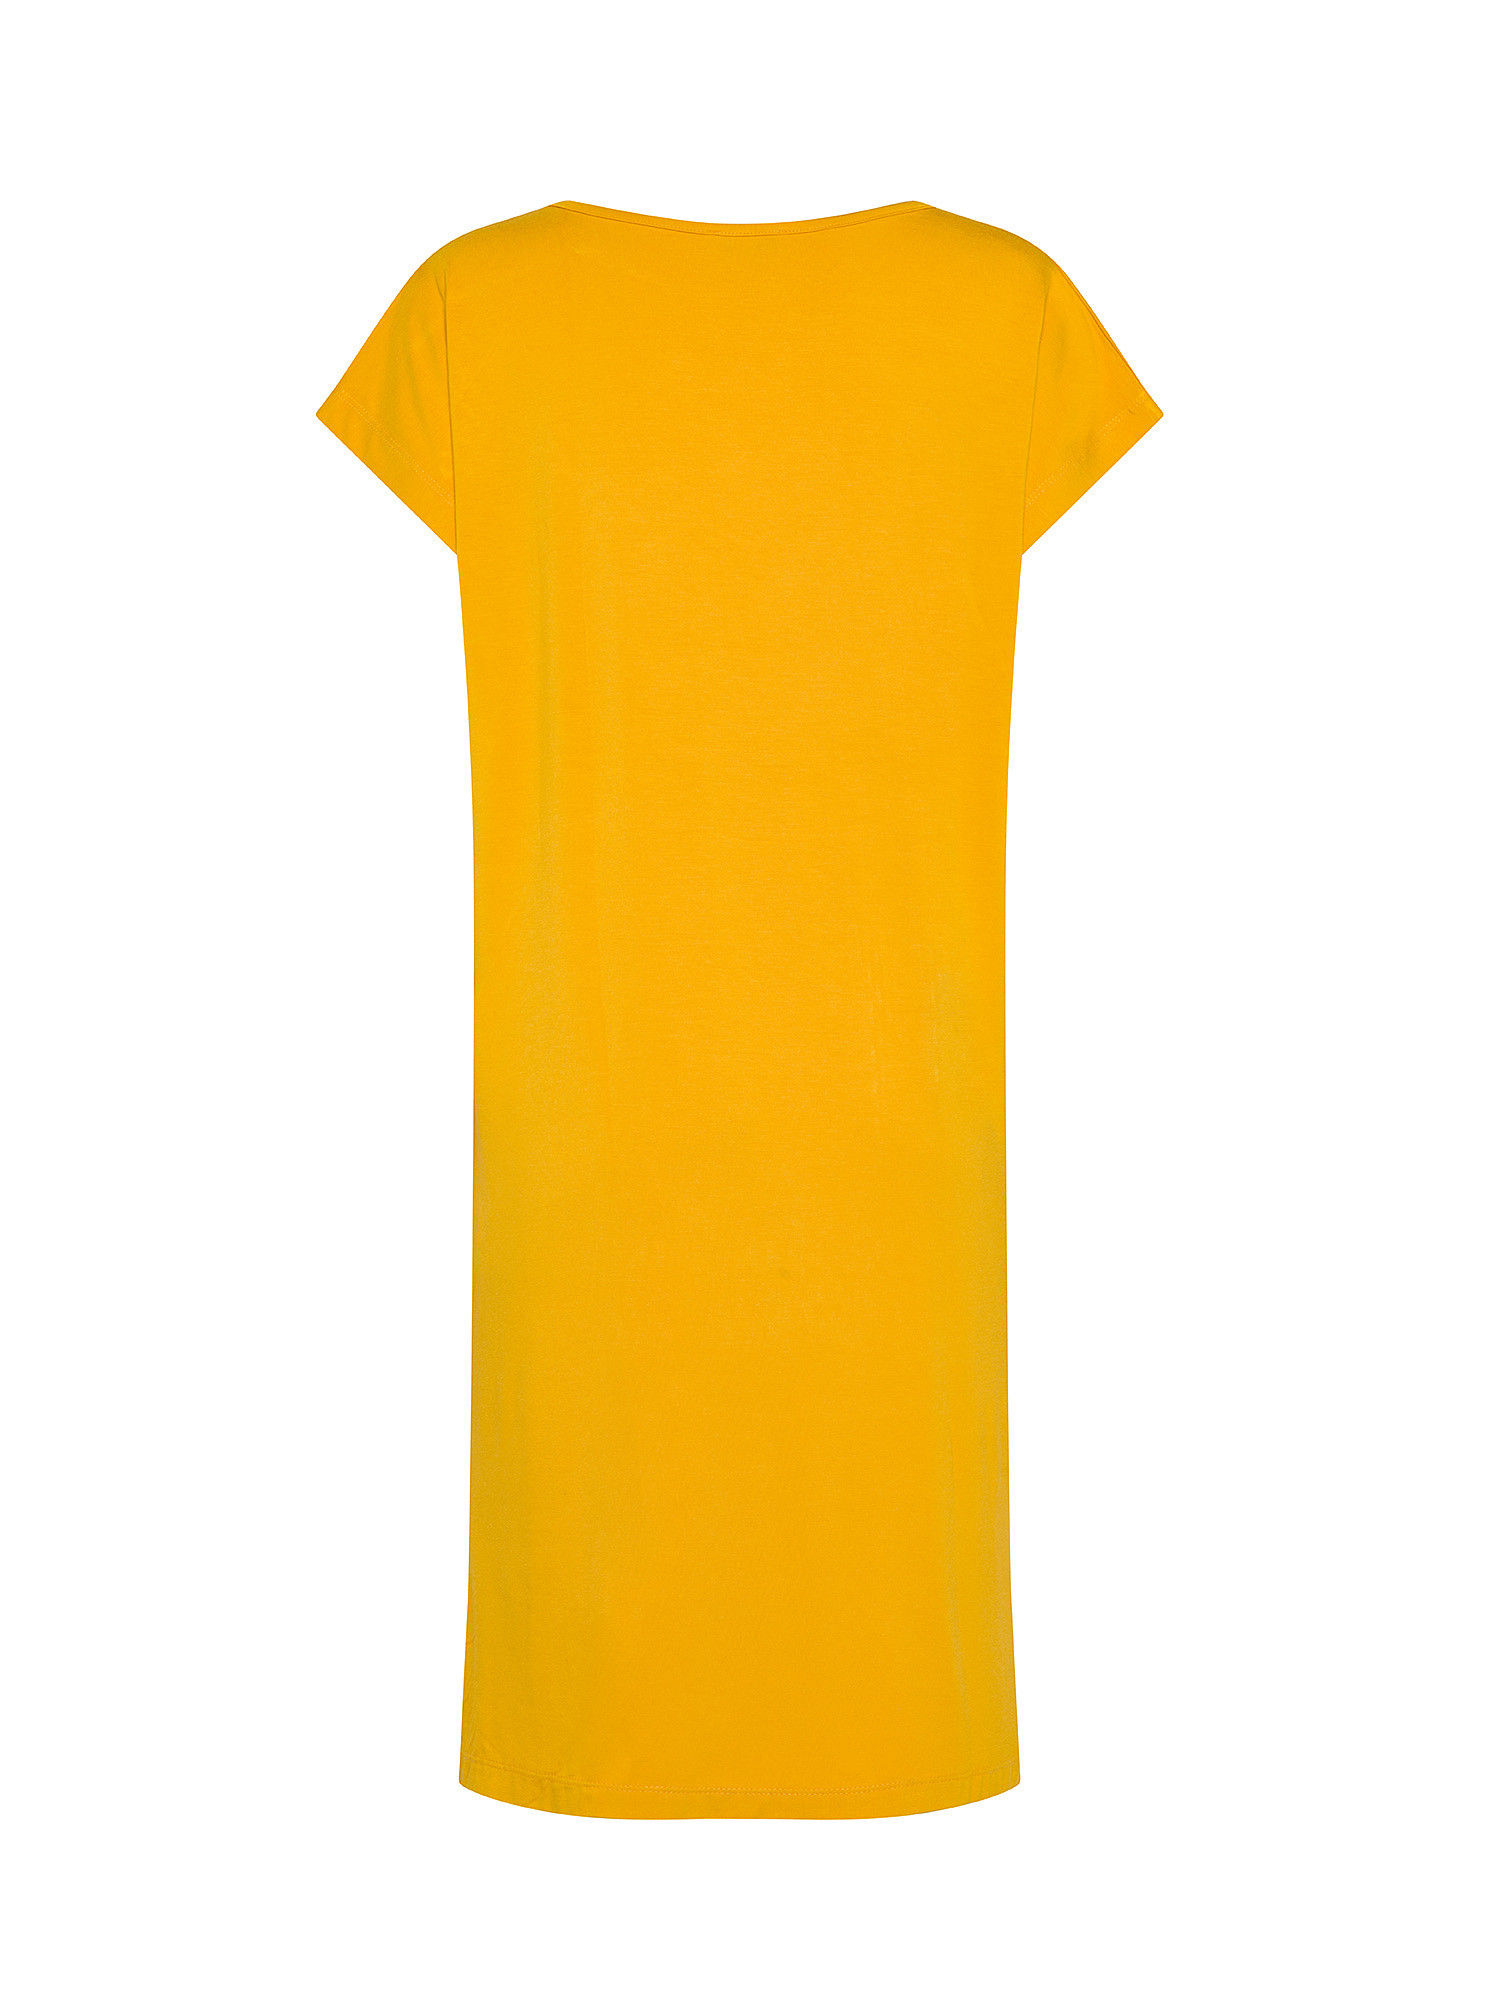 Solid color bamboo viscose dress, Ocra Yellow, large image number 1